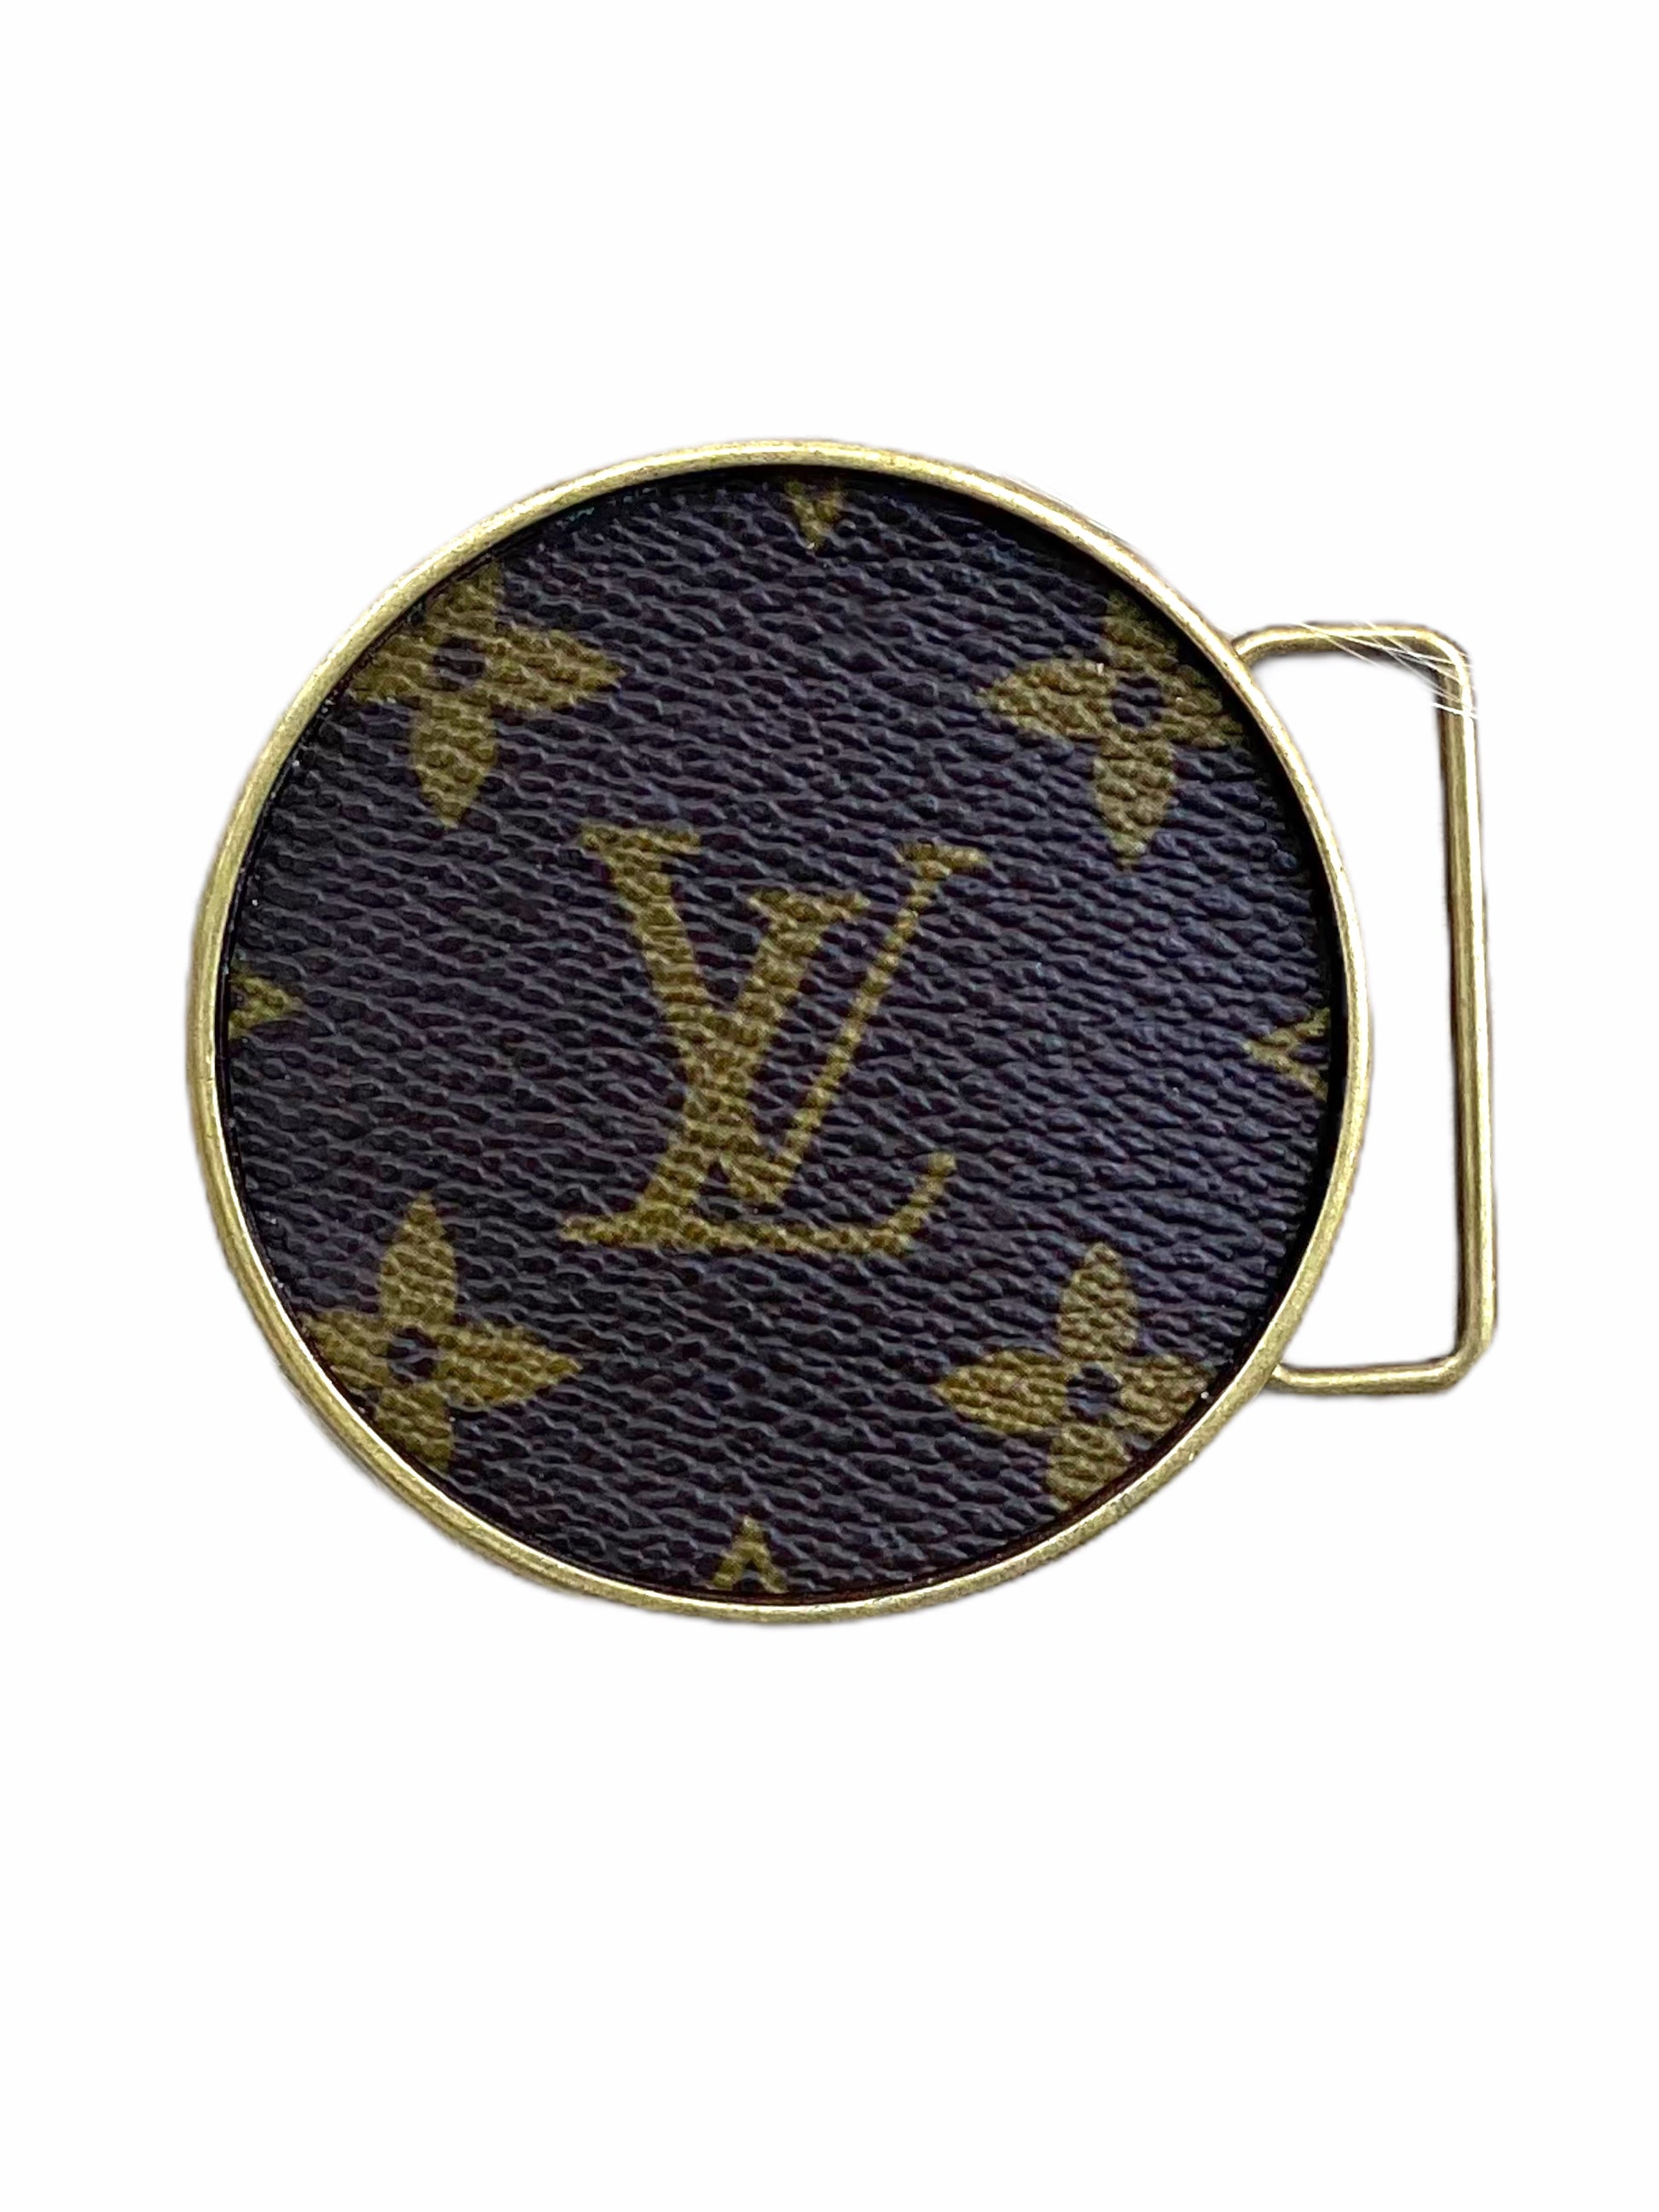 Upcycled Louis Vuitton Coin Purse